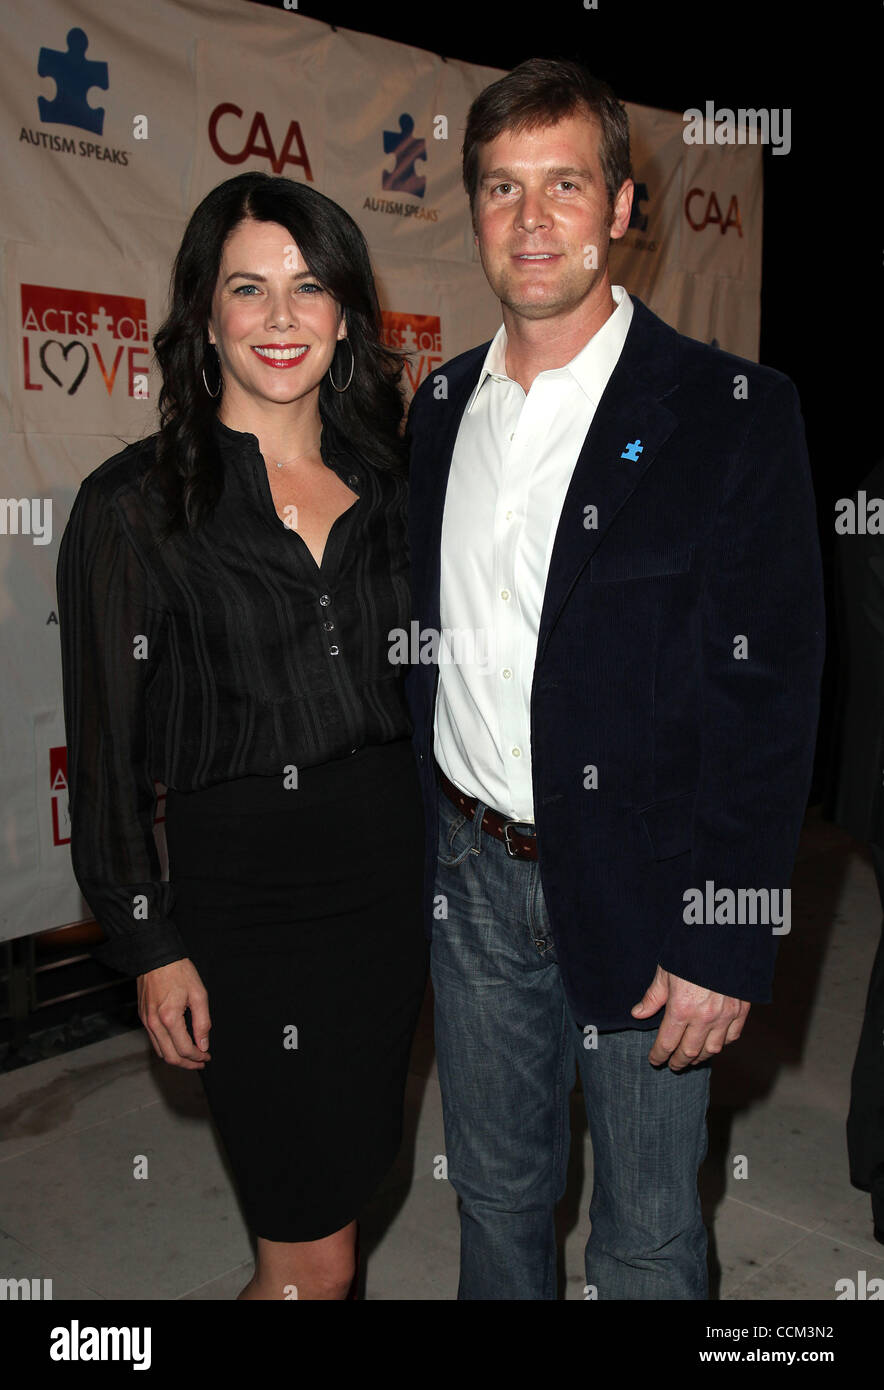 LAUREN GRAHAM & PETER KRAUSE arrives for the 8th Annual 'Acts of Love' to support Autism Awareness at CAA. (Credit Image: © Lisa O'Connor/ZUMApress.com) Stock Photo